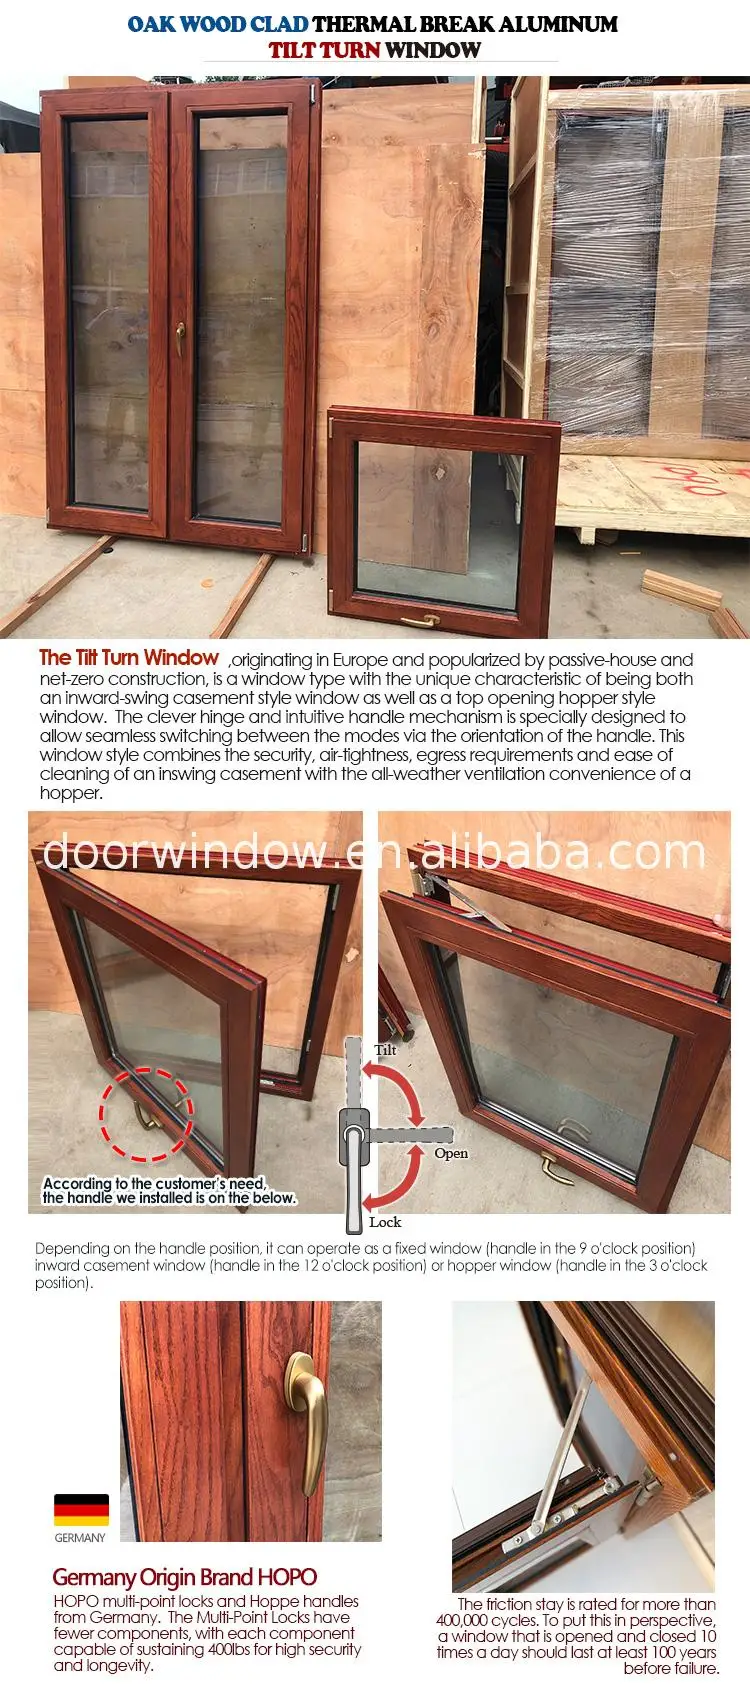 Professional factory double pane window replacement